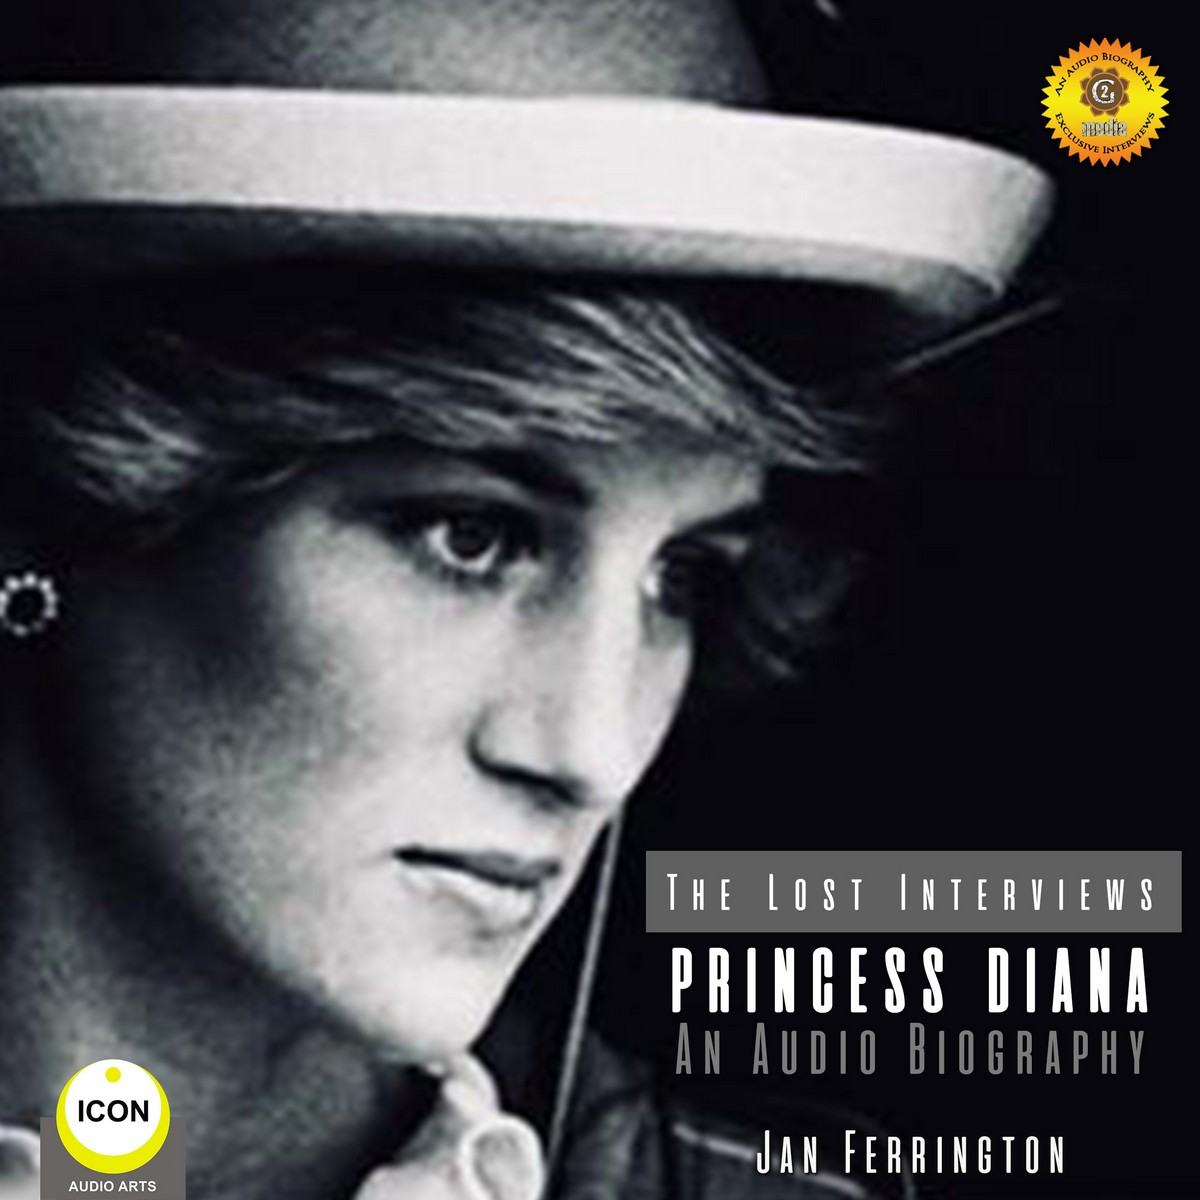 Princess Diana: The Lost Interviews – An Audio Biography